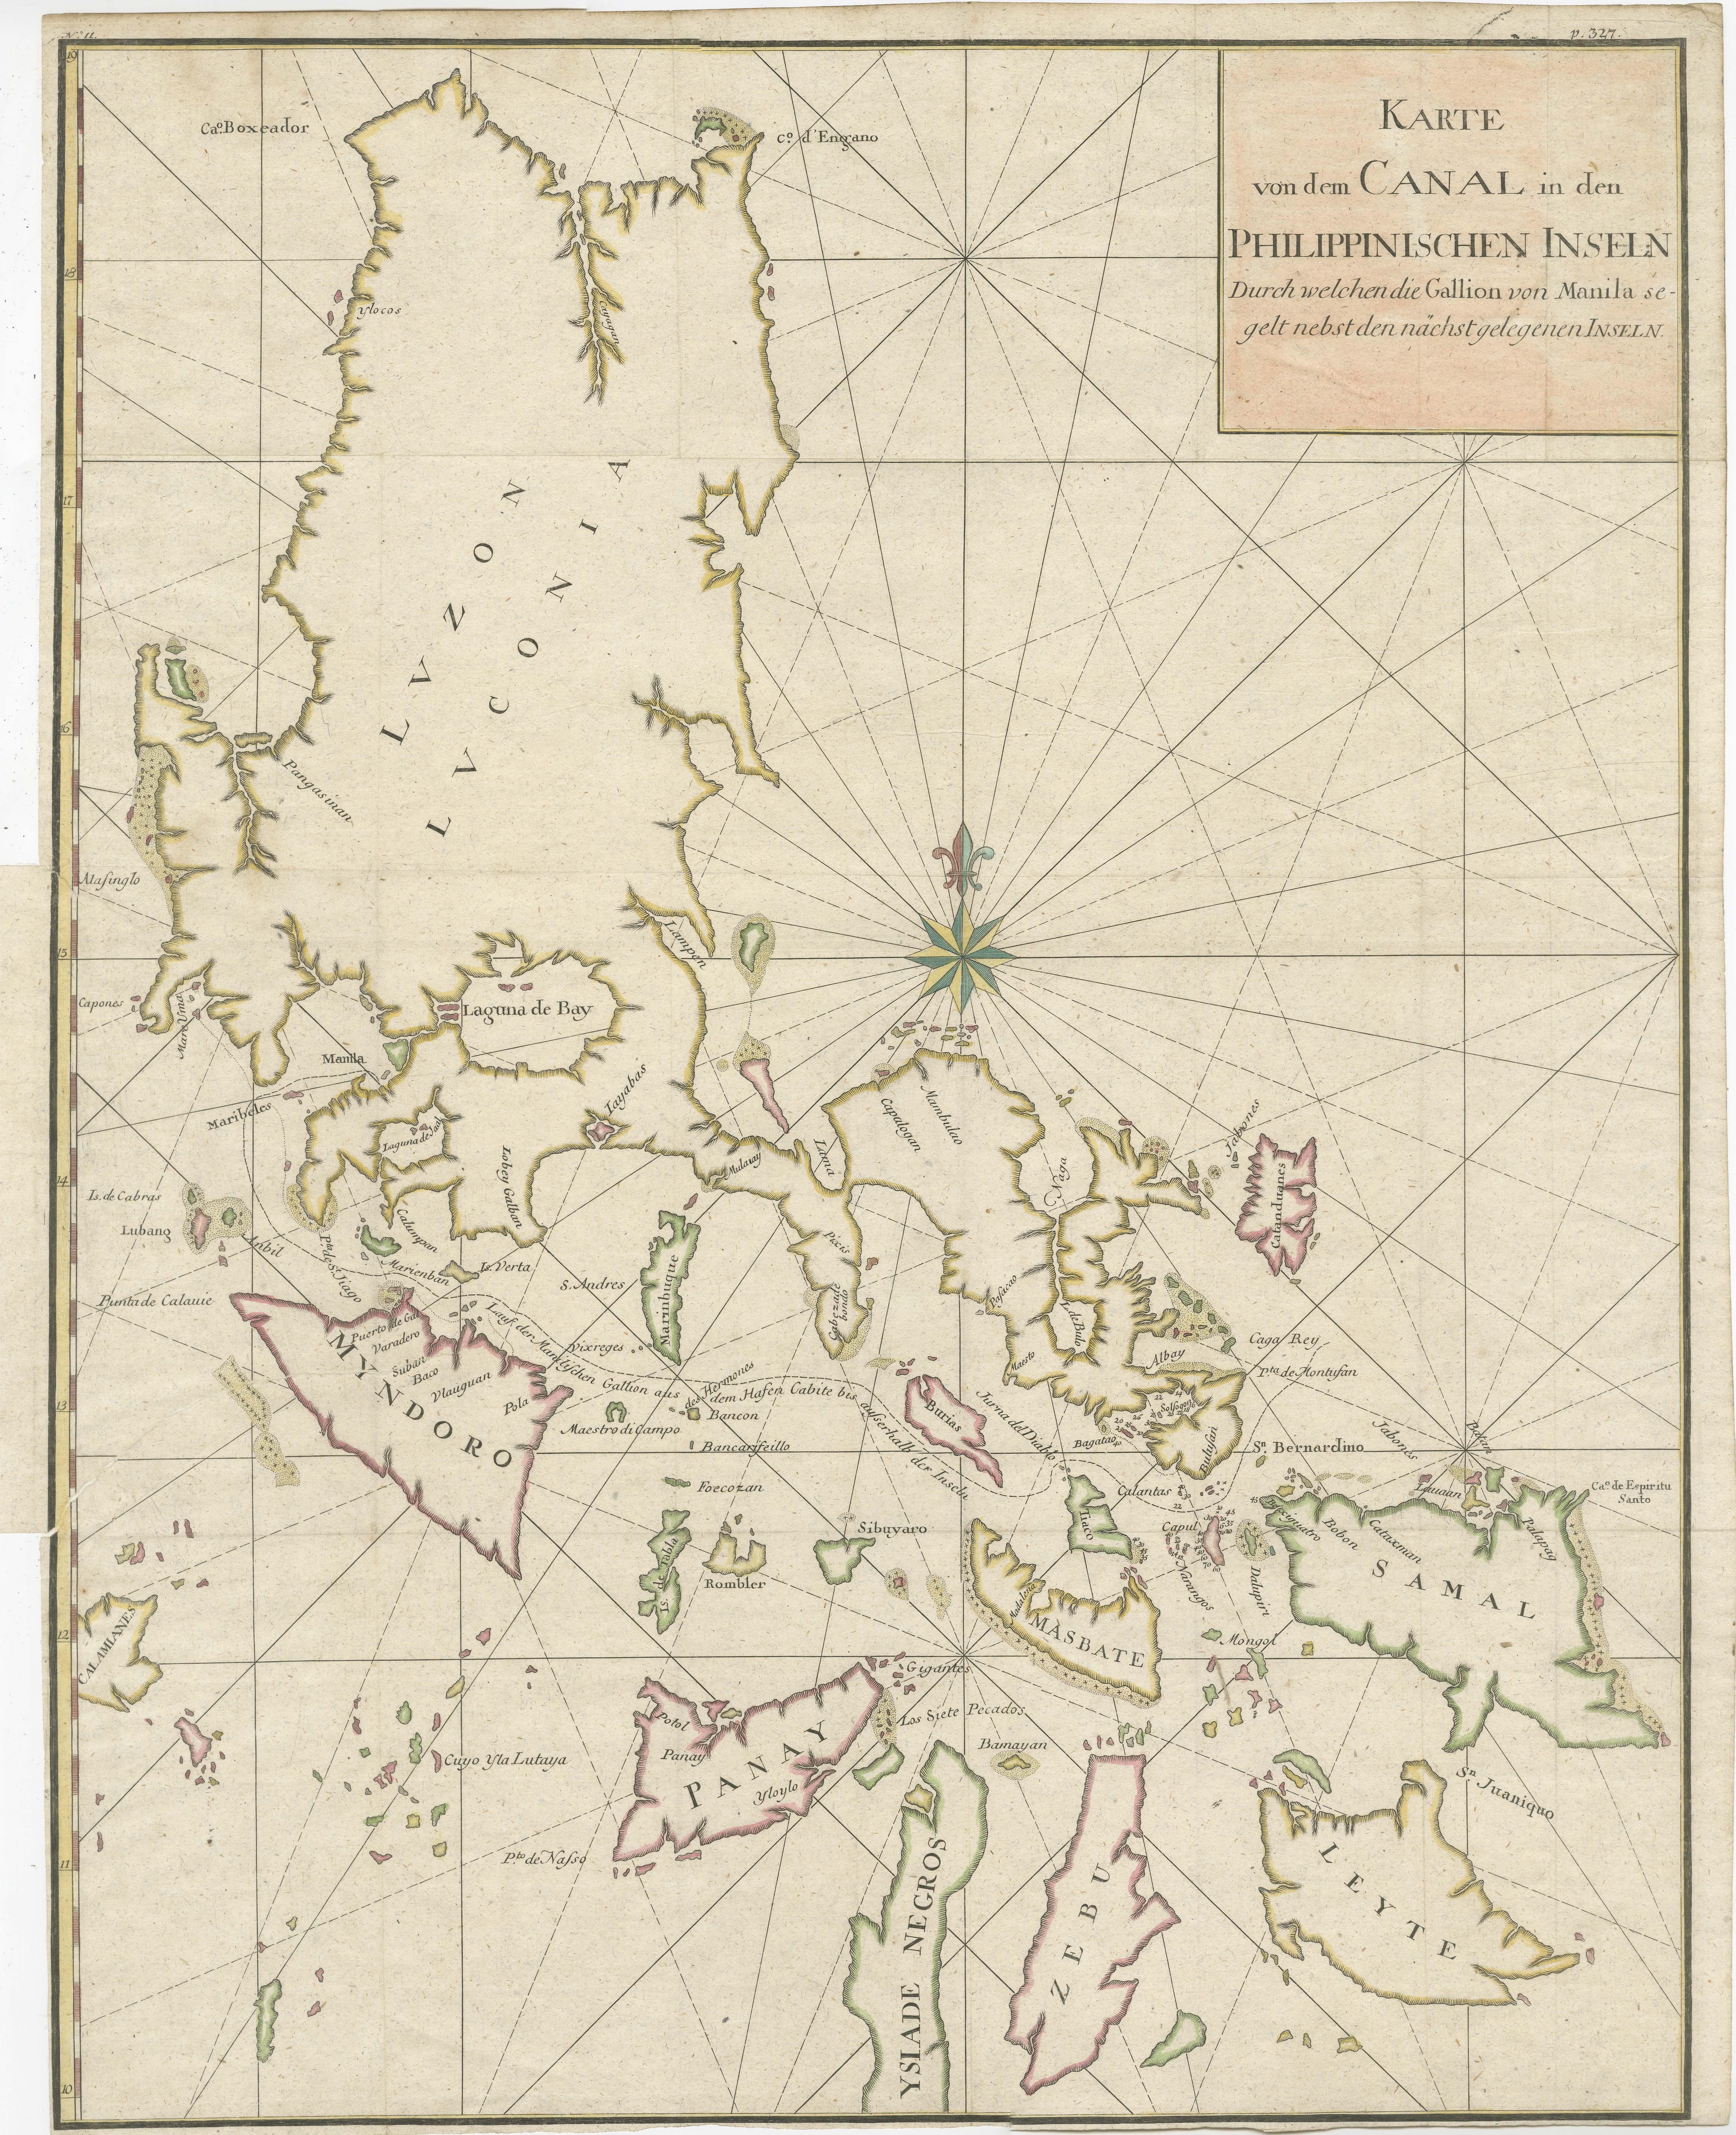 Large German Chart of the Islands of the Philippines with Hand-Colored Borders For Sale 1